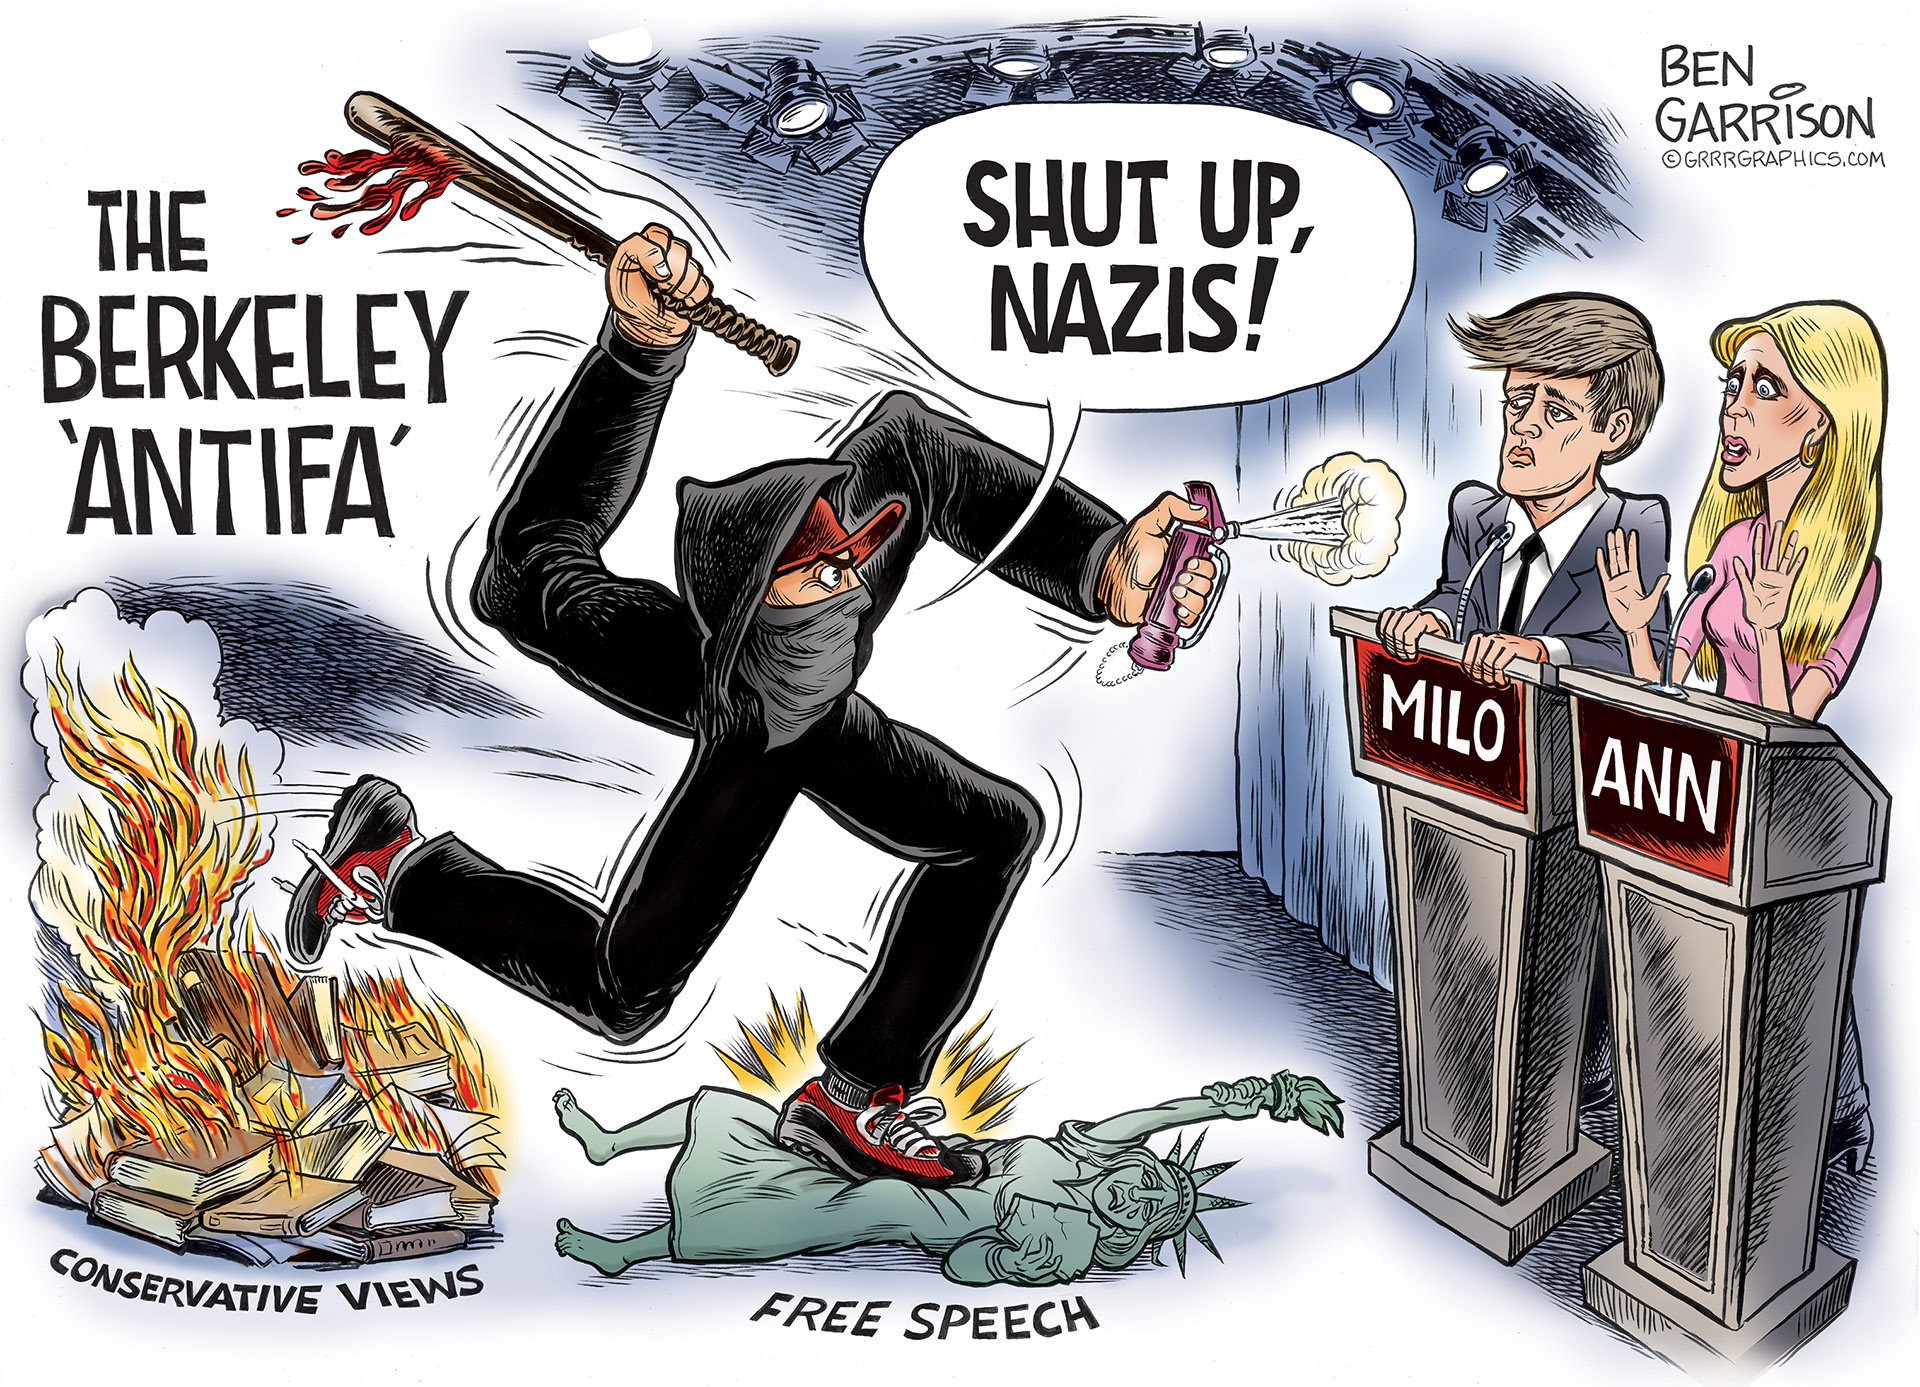 Antifa is actually trying to shut down free speech at Berkley. More fascism from the anti fascist.